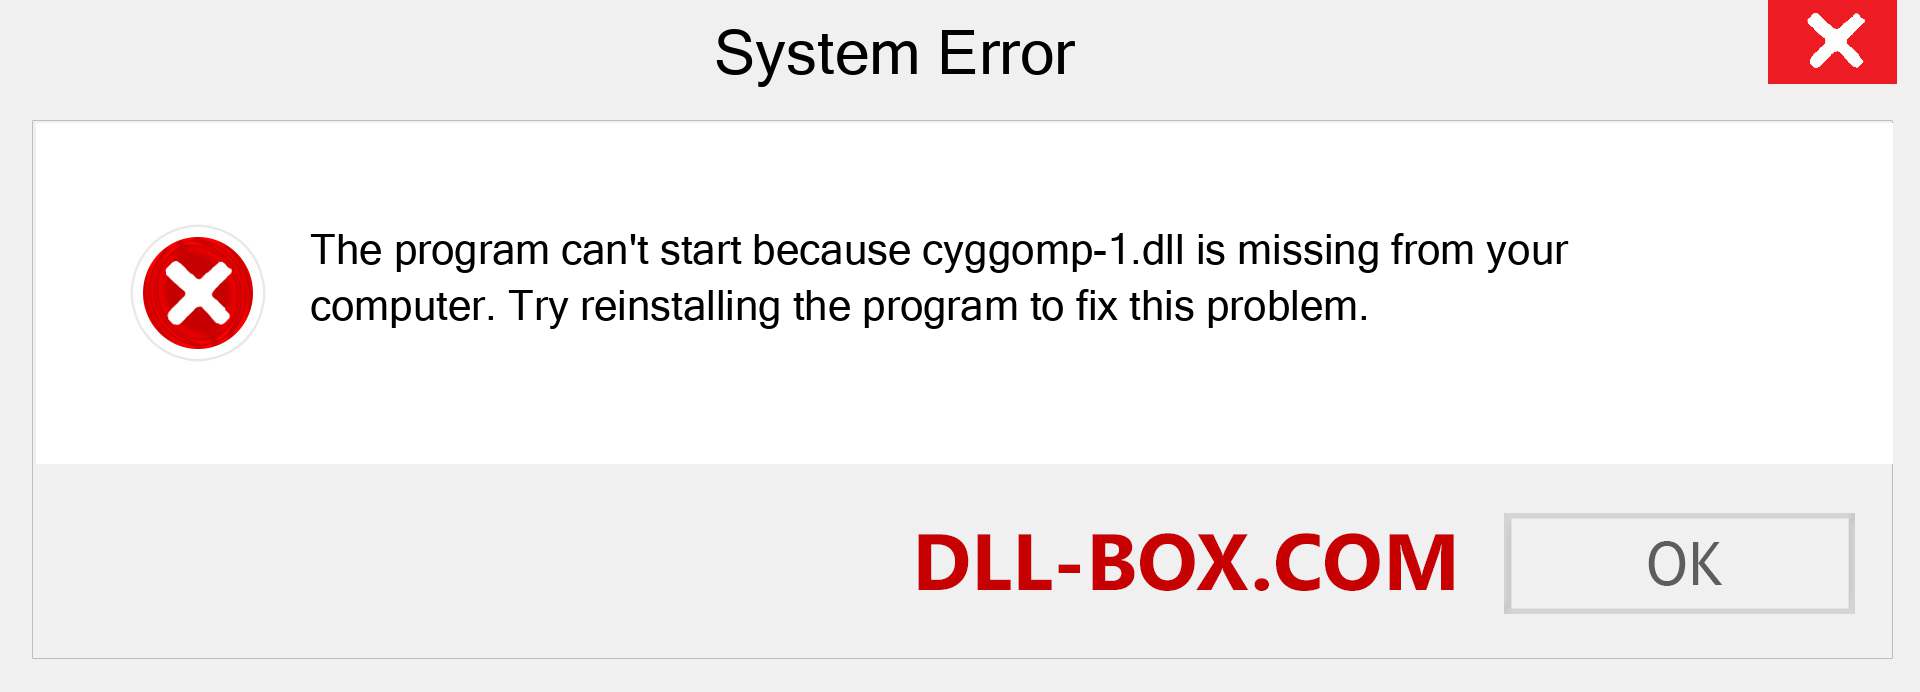  cyggomp-1.dll file is missing?. Download for Windows 7, 8, 10 - Fix  cyggomp-1 dll Missing Error on Windows, photos, images